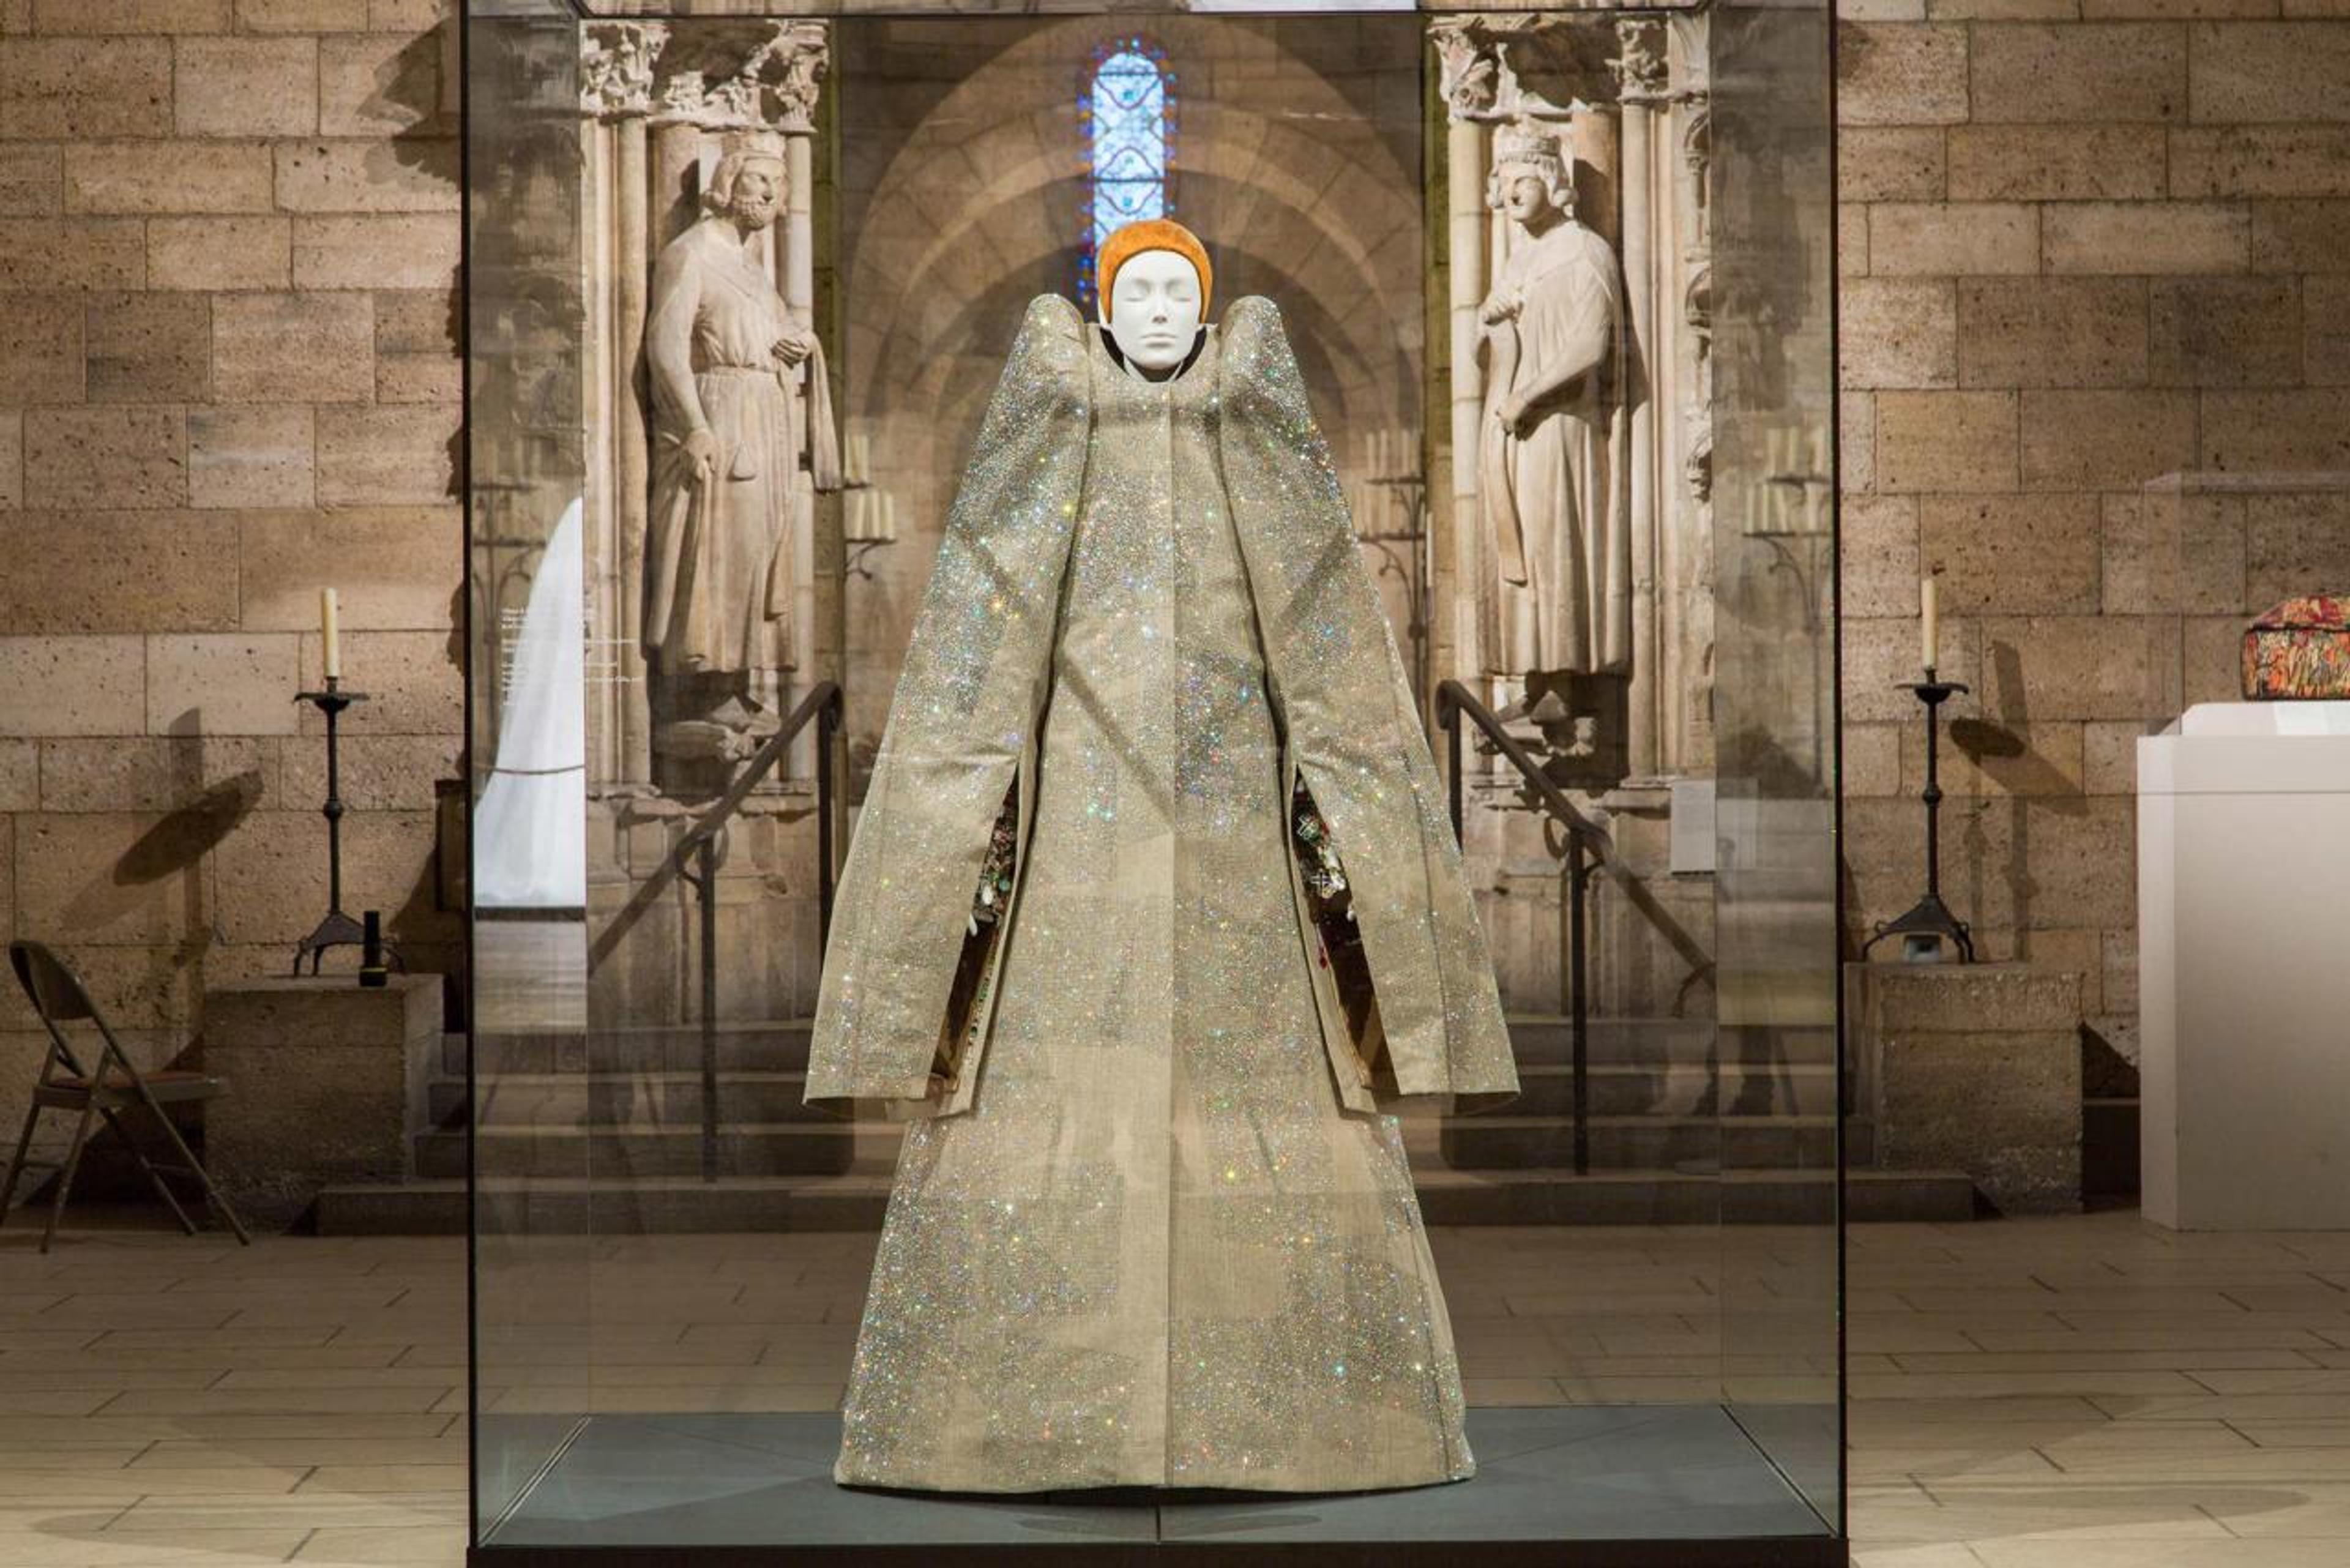 View of “Heavenly Bodies: Fashion and the Catholic Imagination,” The Cloisters, The Met, New York, 2018